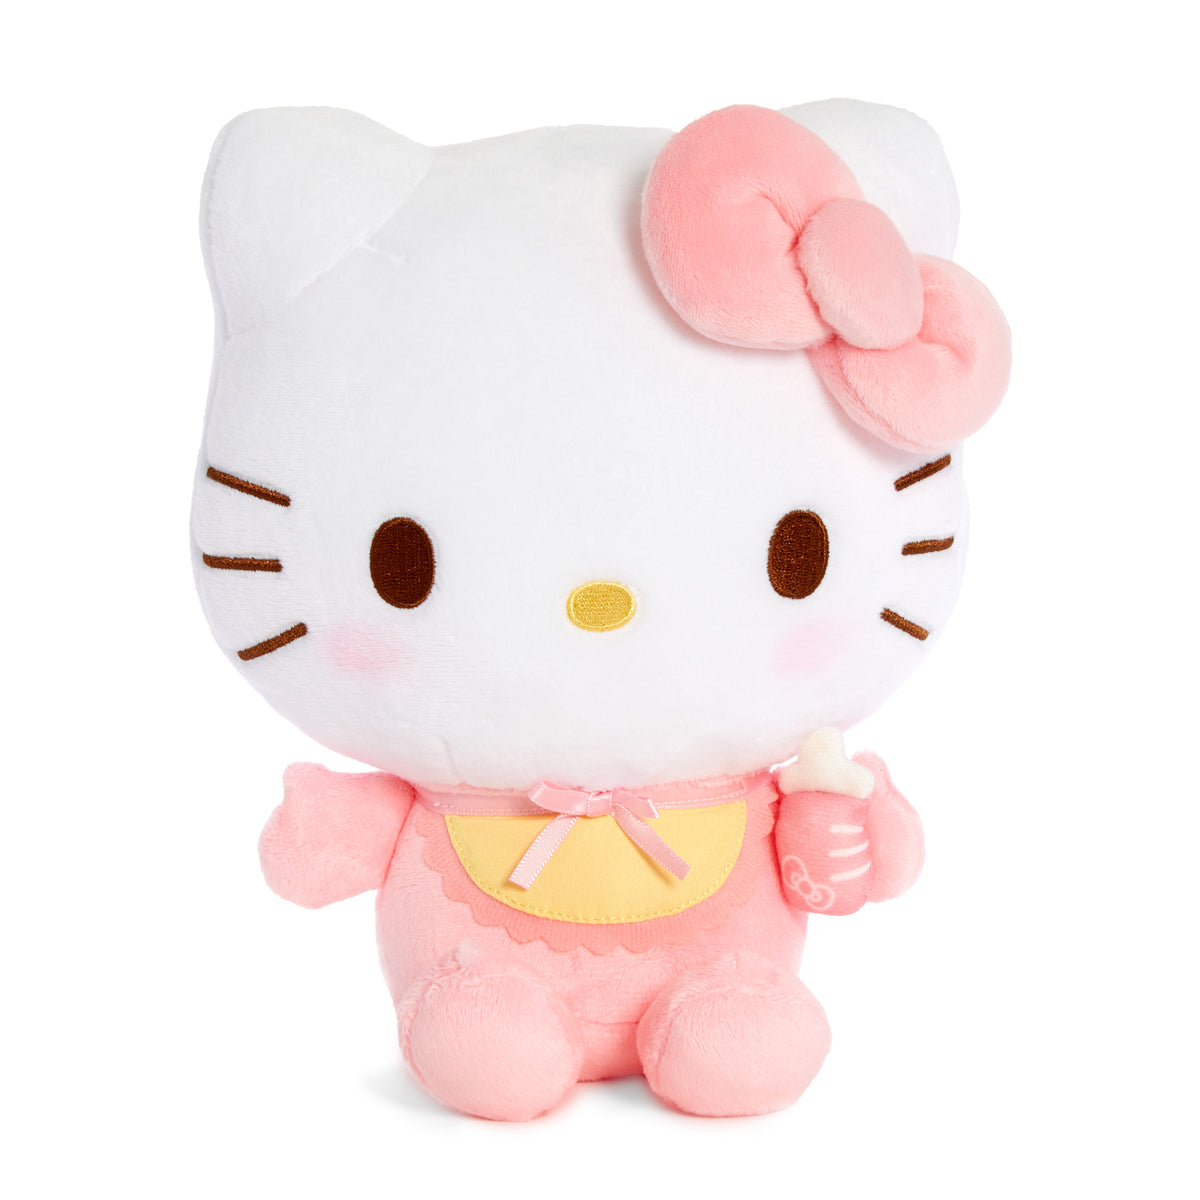 baby hello kitty images